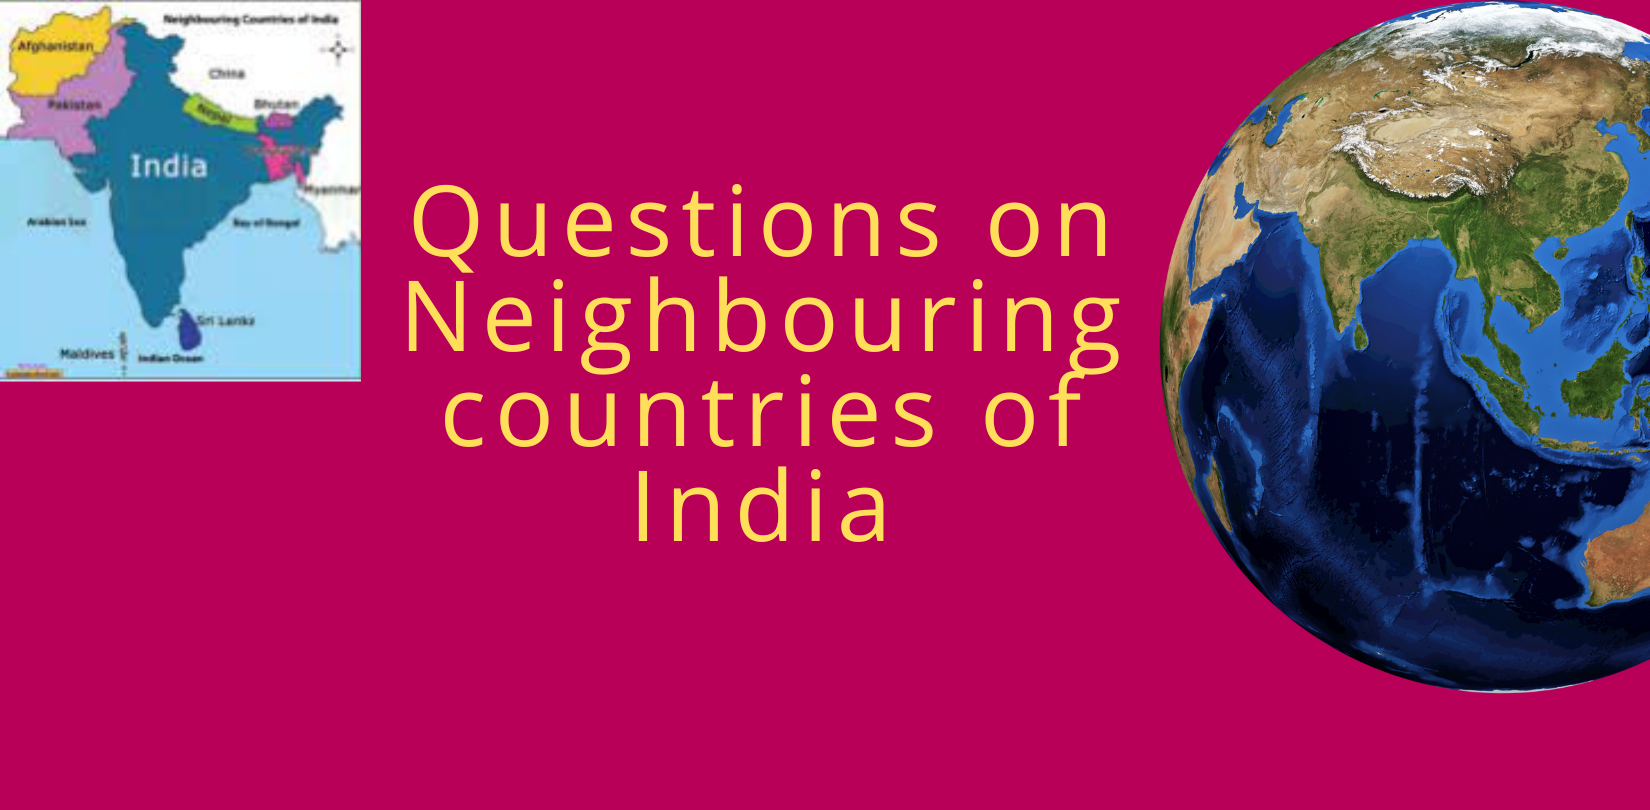 Questions on Neighbouring countries of India